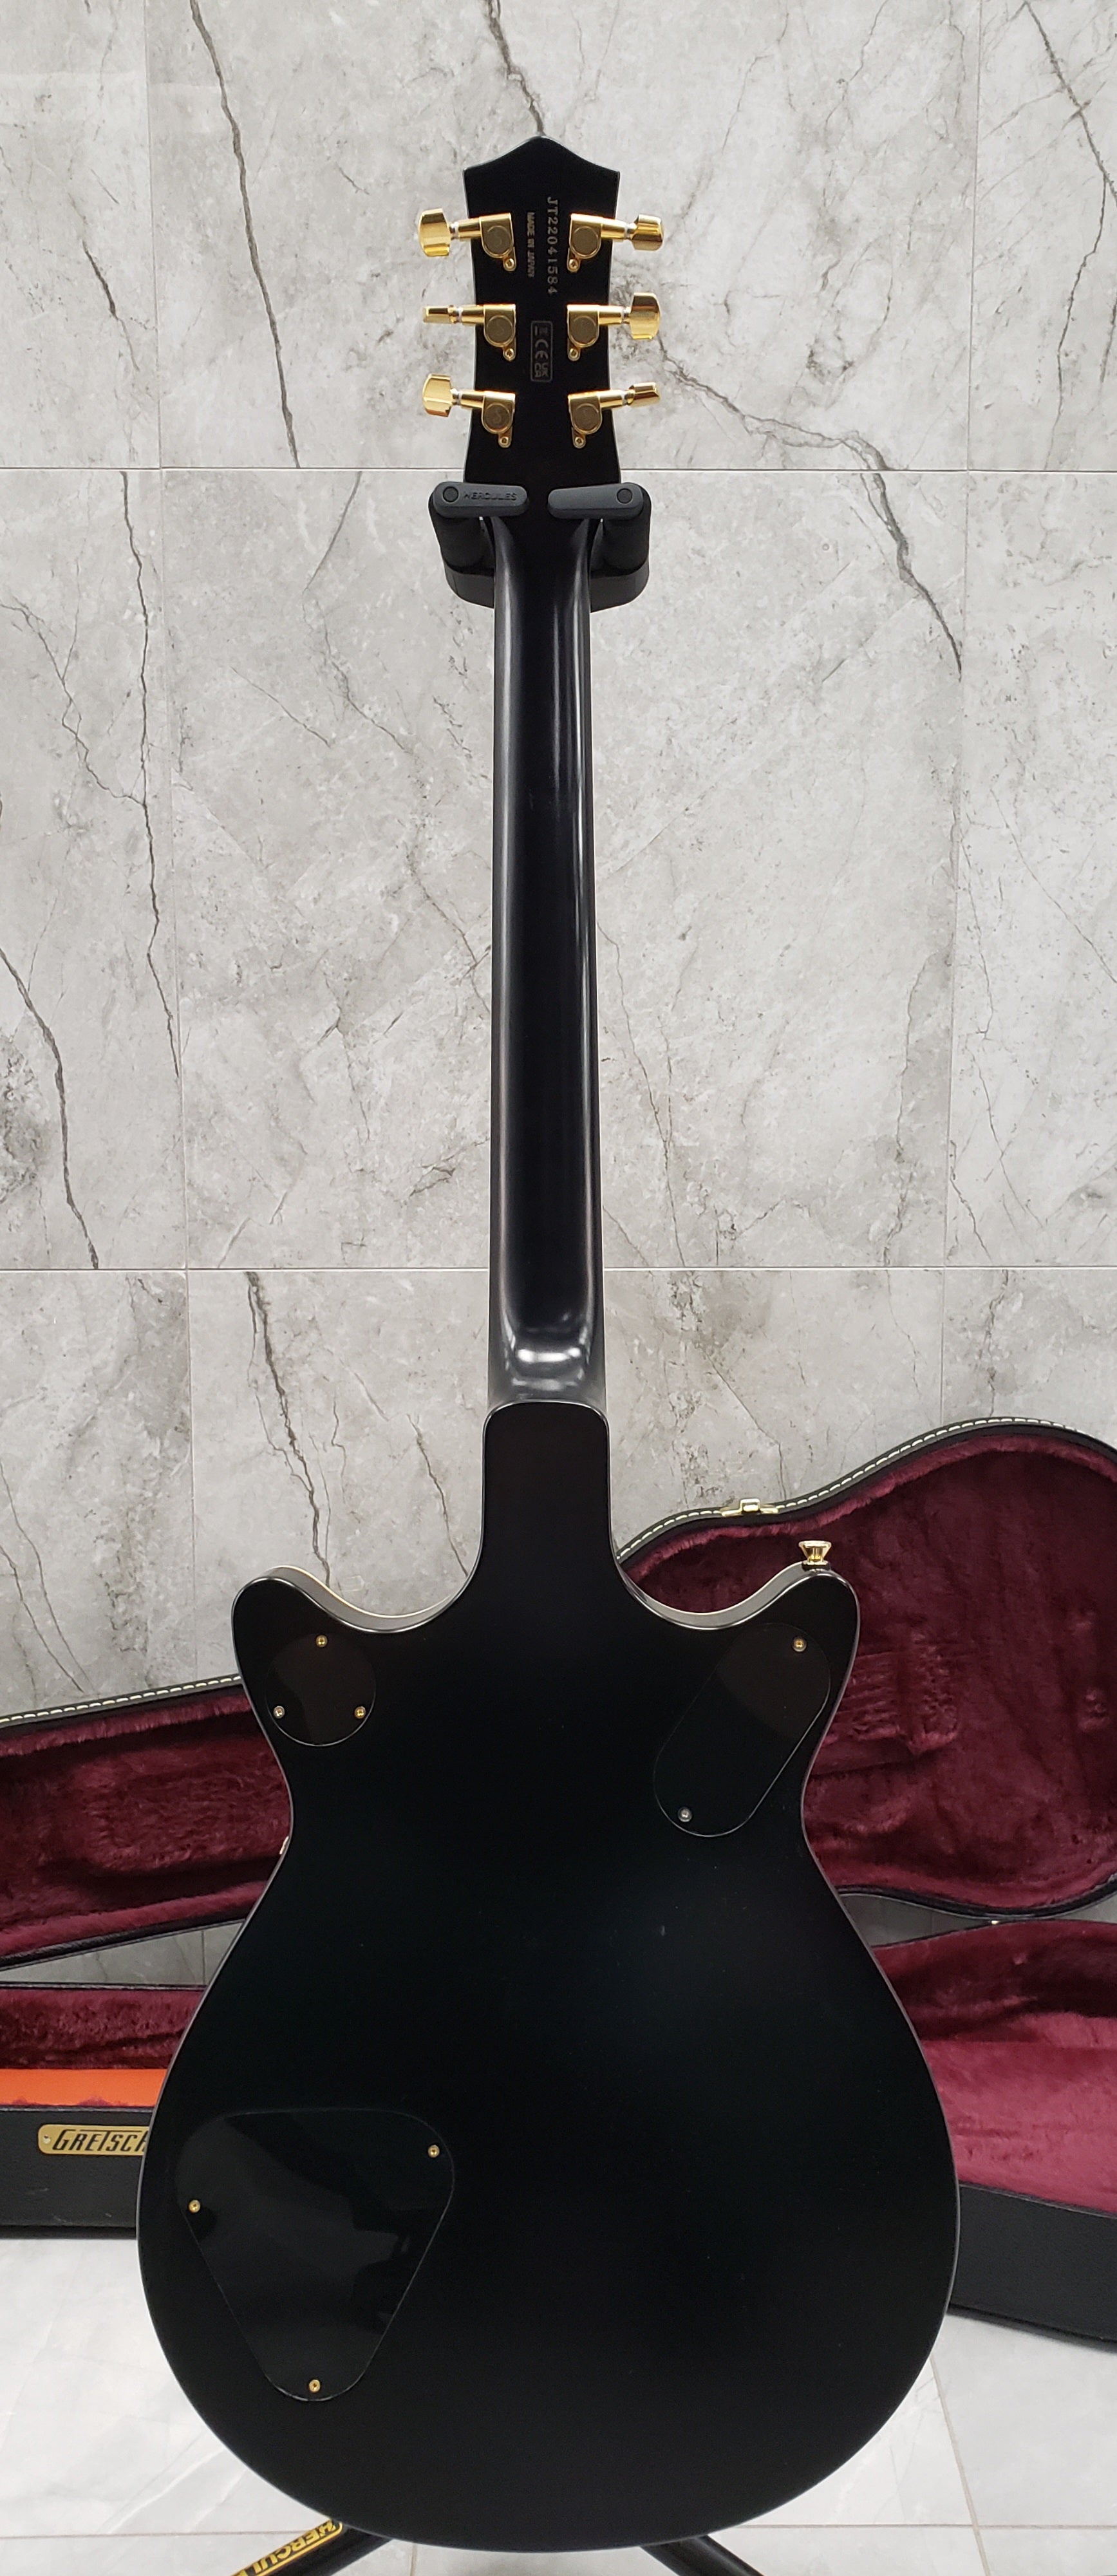 GRETSCH G6131-MY-RB Limited Edition Malcolm Young Signature Jet Ebony Fingerboard, Vintage Firebird Red 2411916845 SERIAL NUMBER JT22041584 - 7.6 LBS